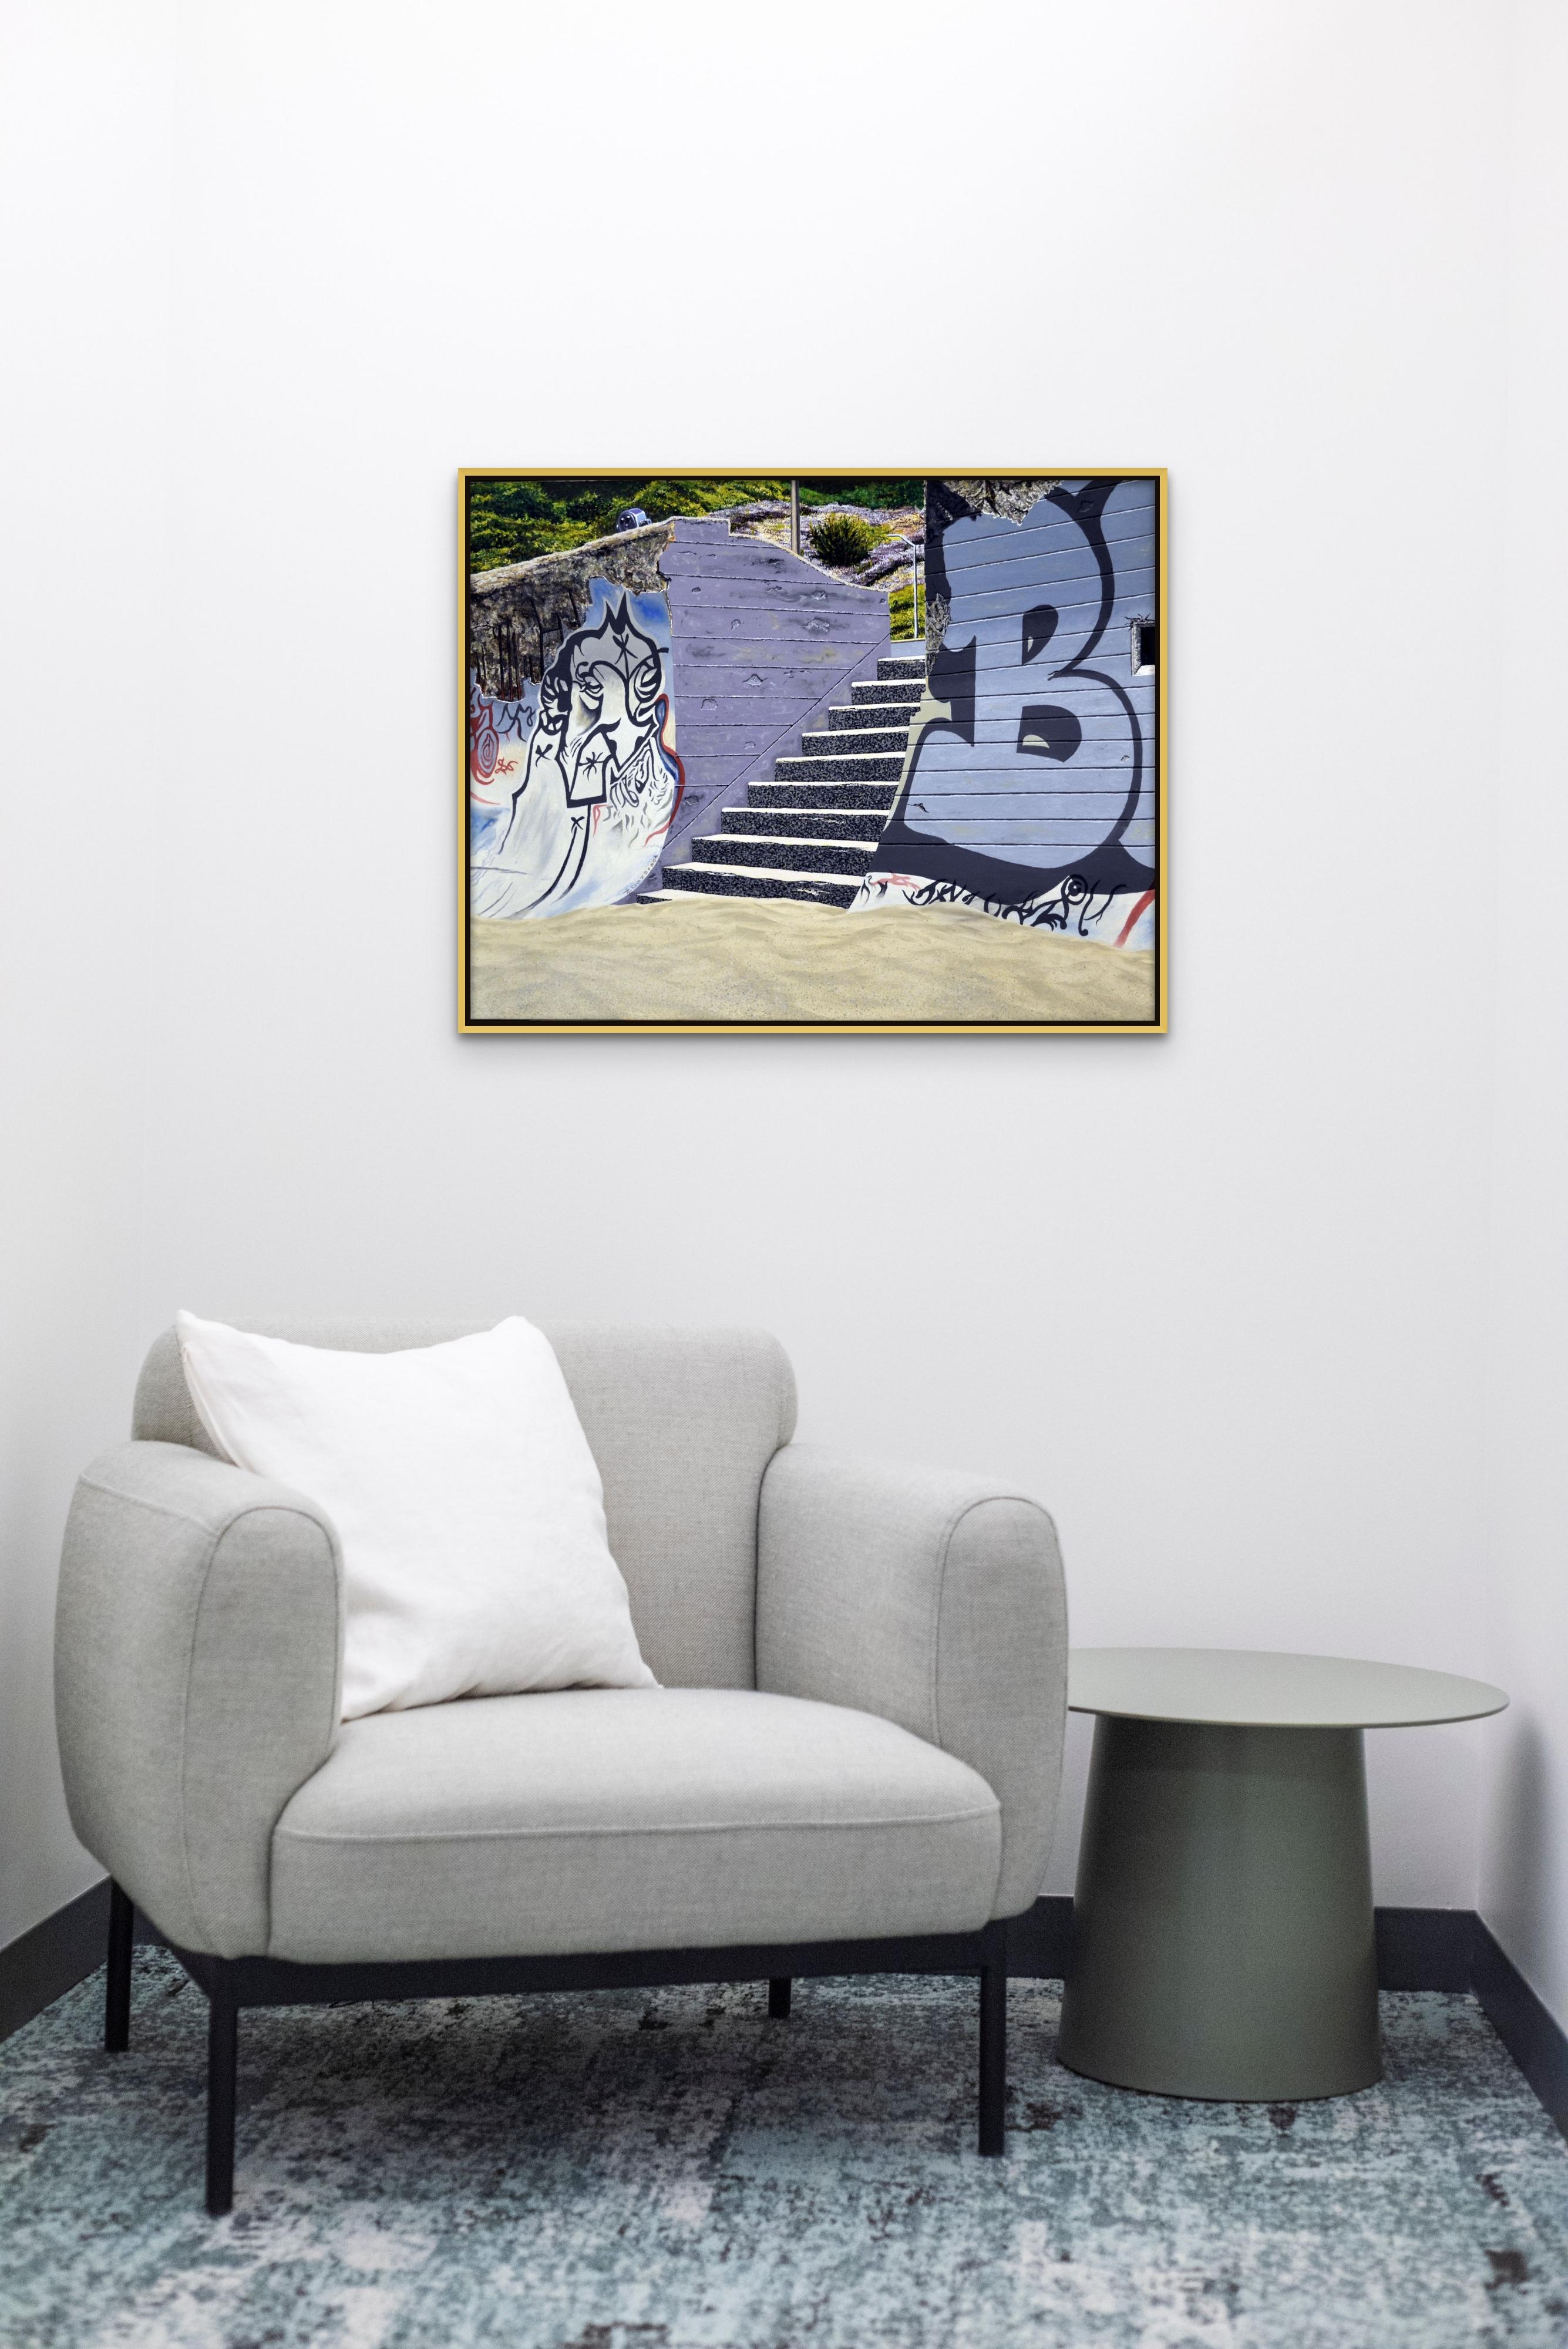 Sea Wall - Painting by James Torlakson